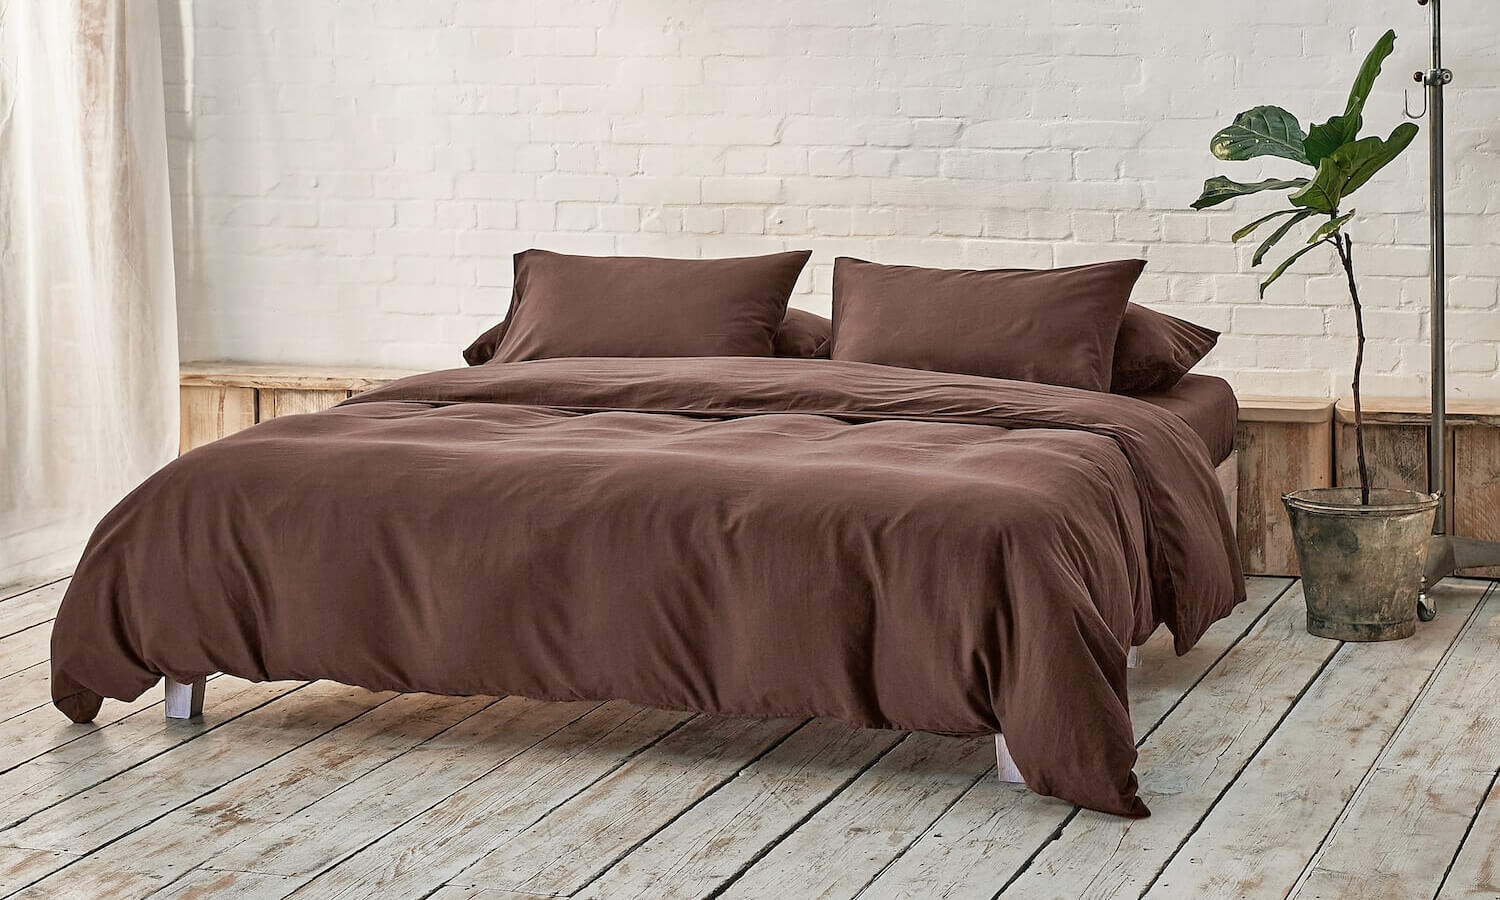 dark brown bedding on bed in a modern room